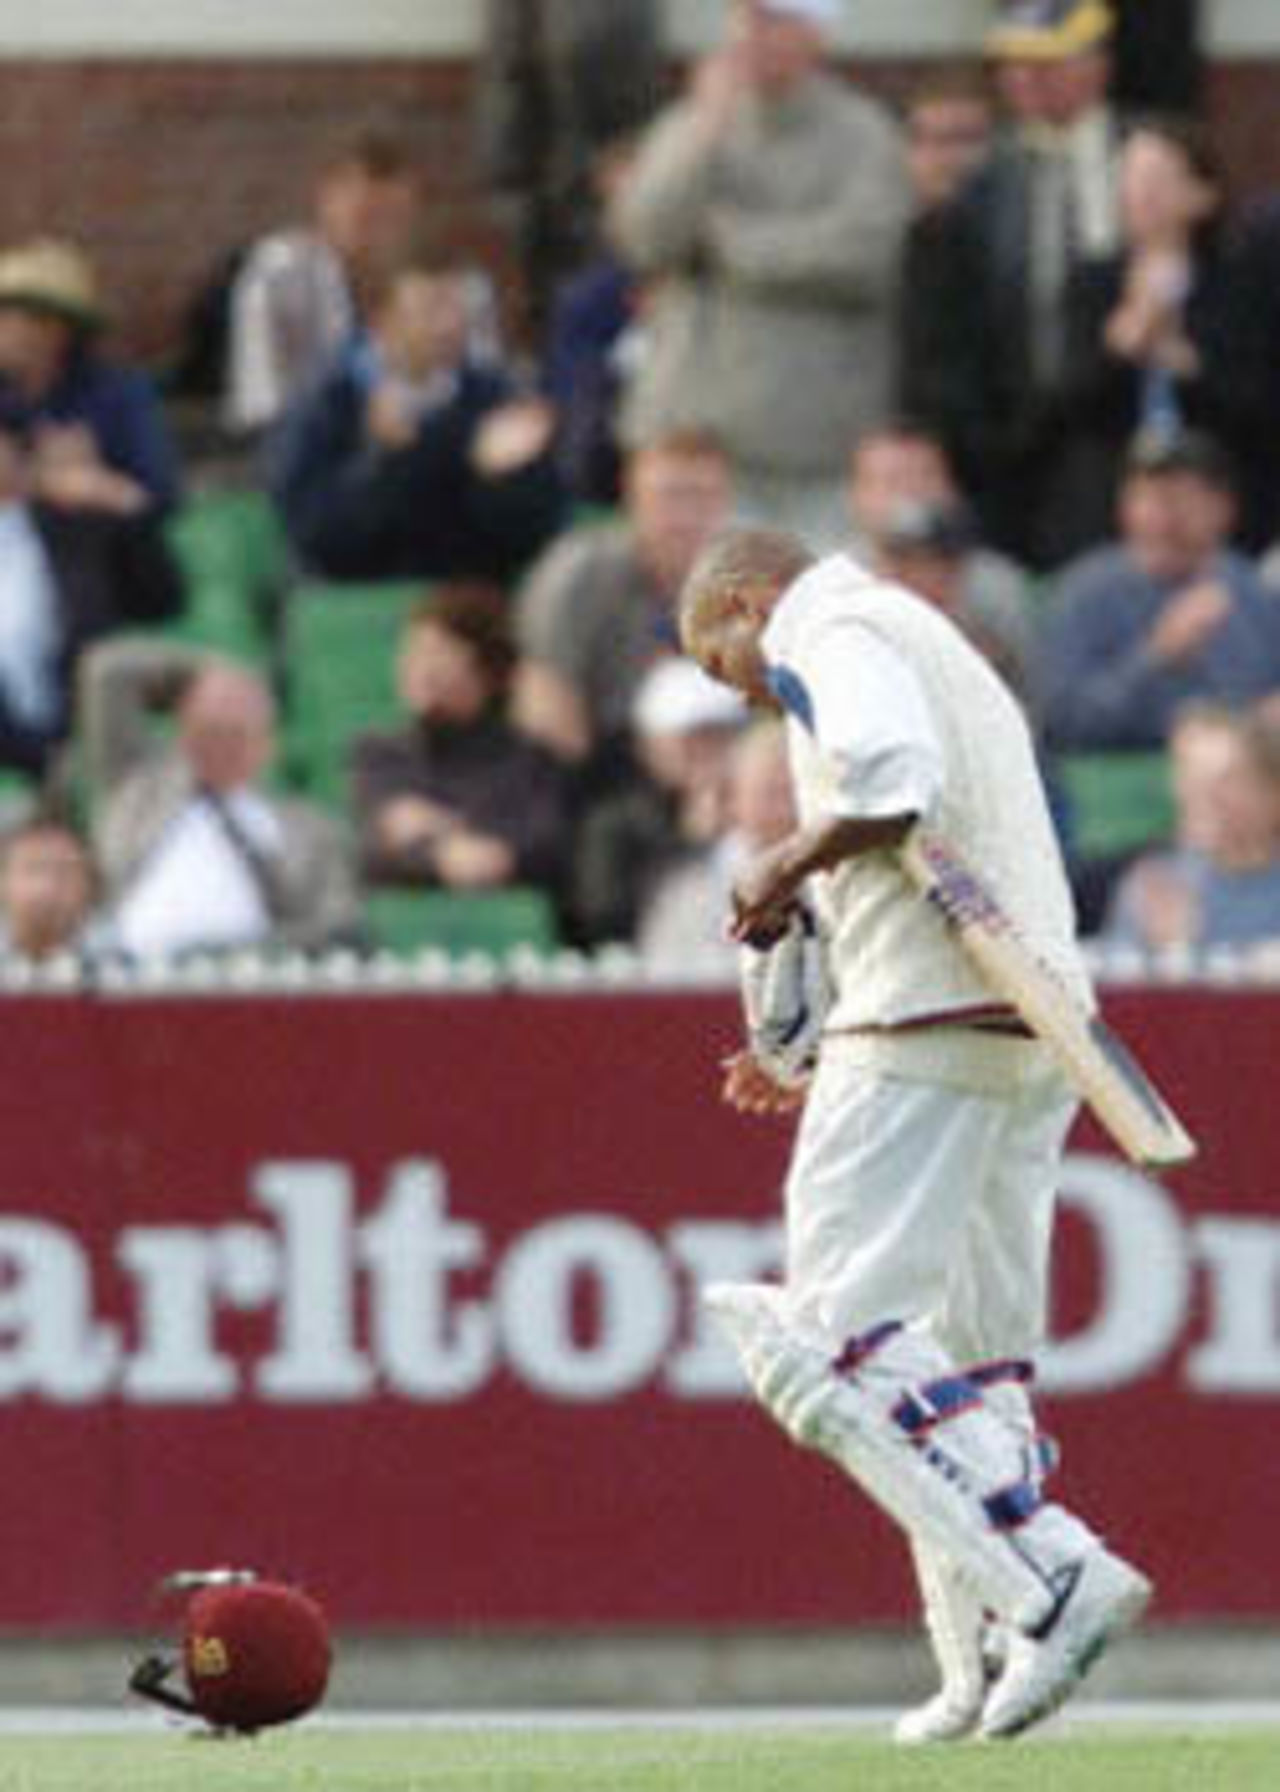 Dejected West Indian star batsman Brian Lara drops his helmet as he leaves the field after being clean bowled by Australian paceman Jason Gillespie on the third day of the fourth Test Match at the MCG in Melbourne, 28 December 2000. Australia declared their second innings close at 262-5 and at stumps the West Indies are again in deep trouble at 10-3 chasing 462 to win.